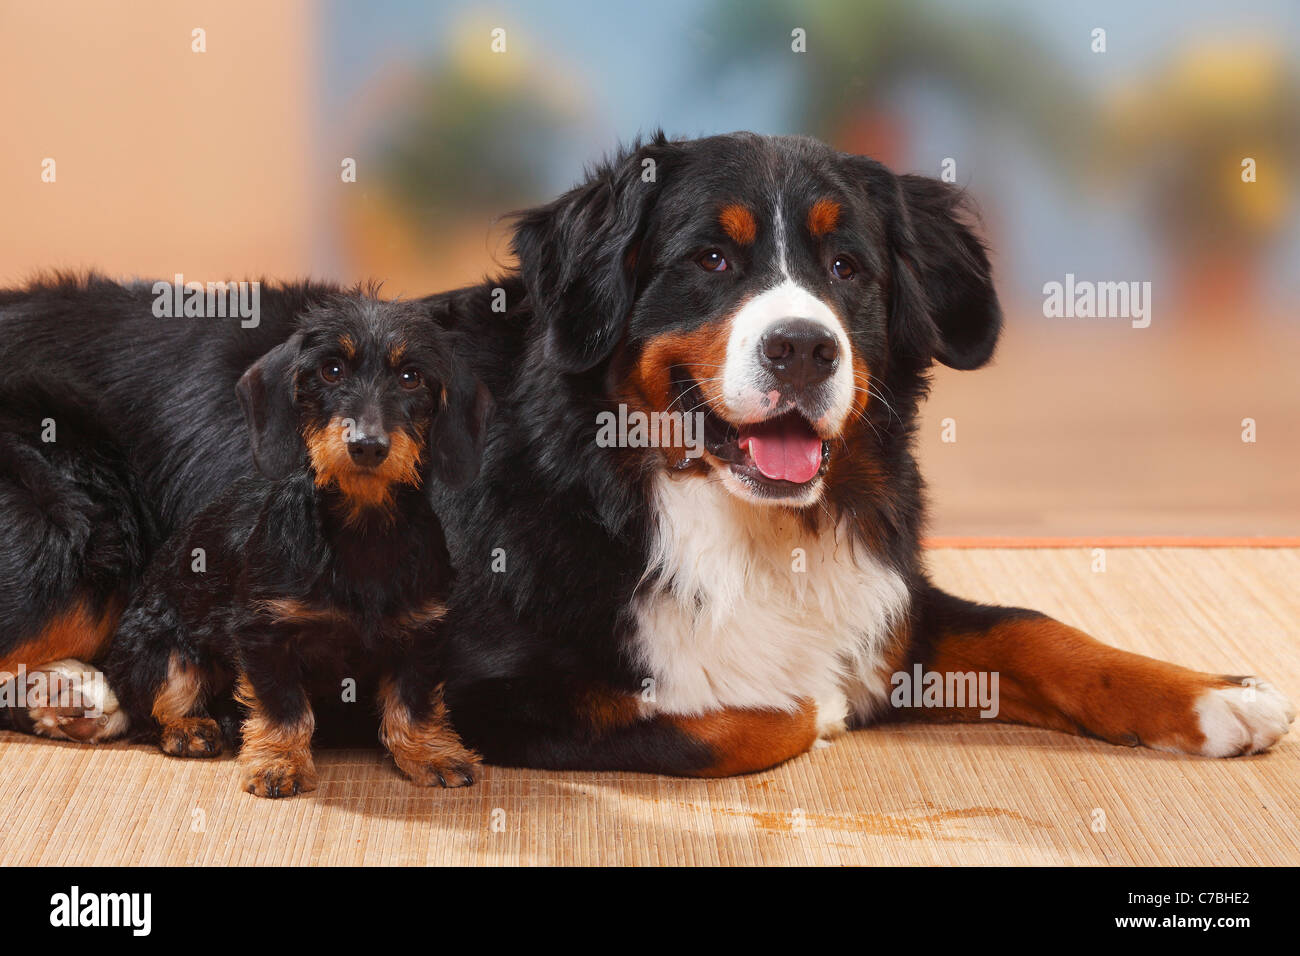 Bernese Mountain Dog and Miniature Wirehaired Dachshund Stock Photo